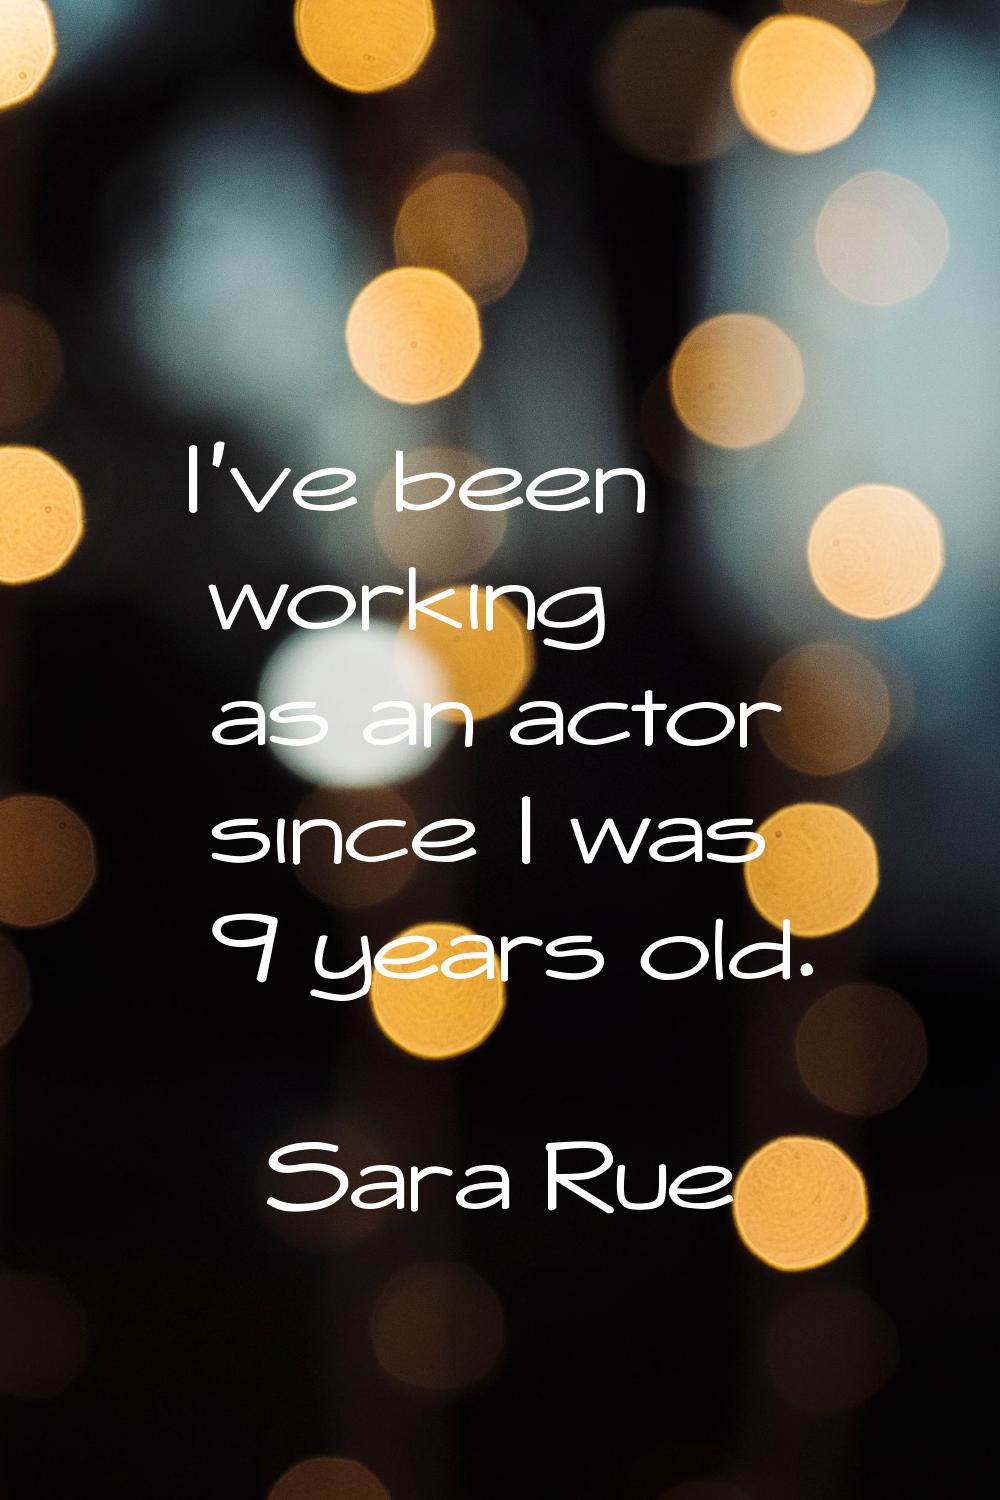 I've been working as an actor since I was 9 years old.